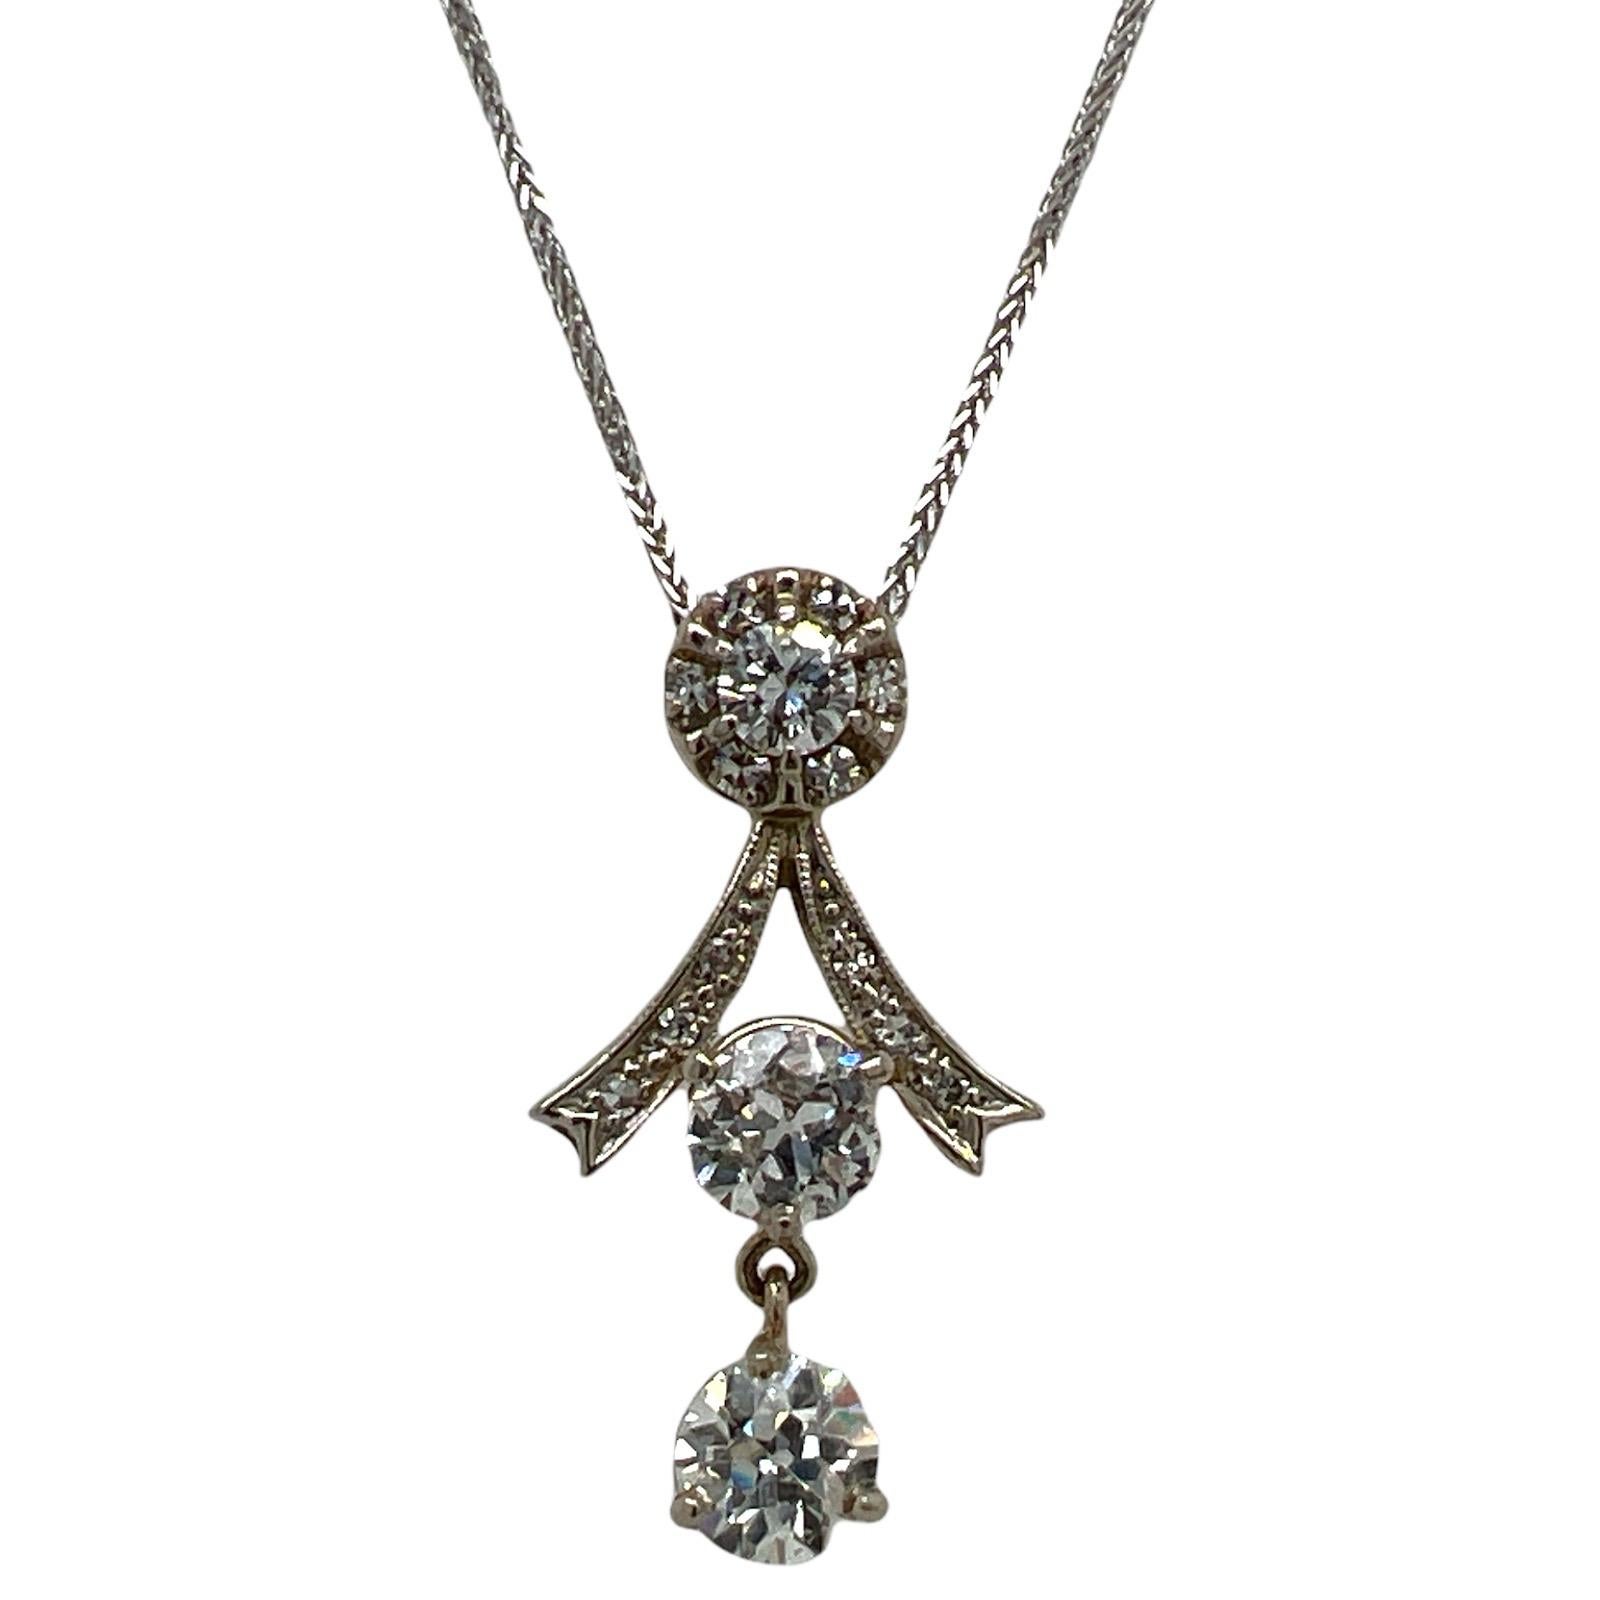 Art Deco diamond drop pendant fashioned in 14 karat white gold. The pendant features 2 Old European cut diamonds weighing approximately 1.64 carat total weight, and another .42 cttw side diamonds (2.06 CTW). The pendant measures 1.5 inches in length